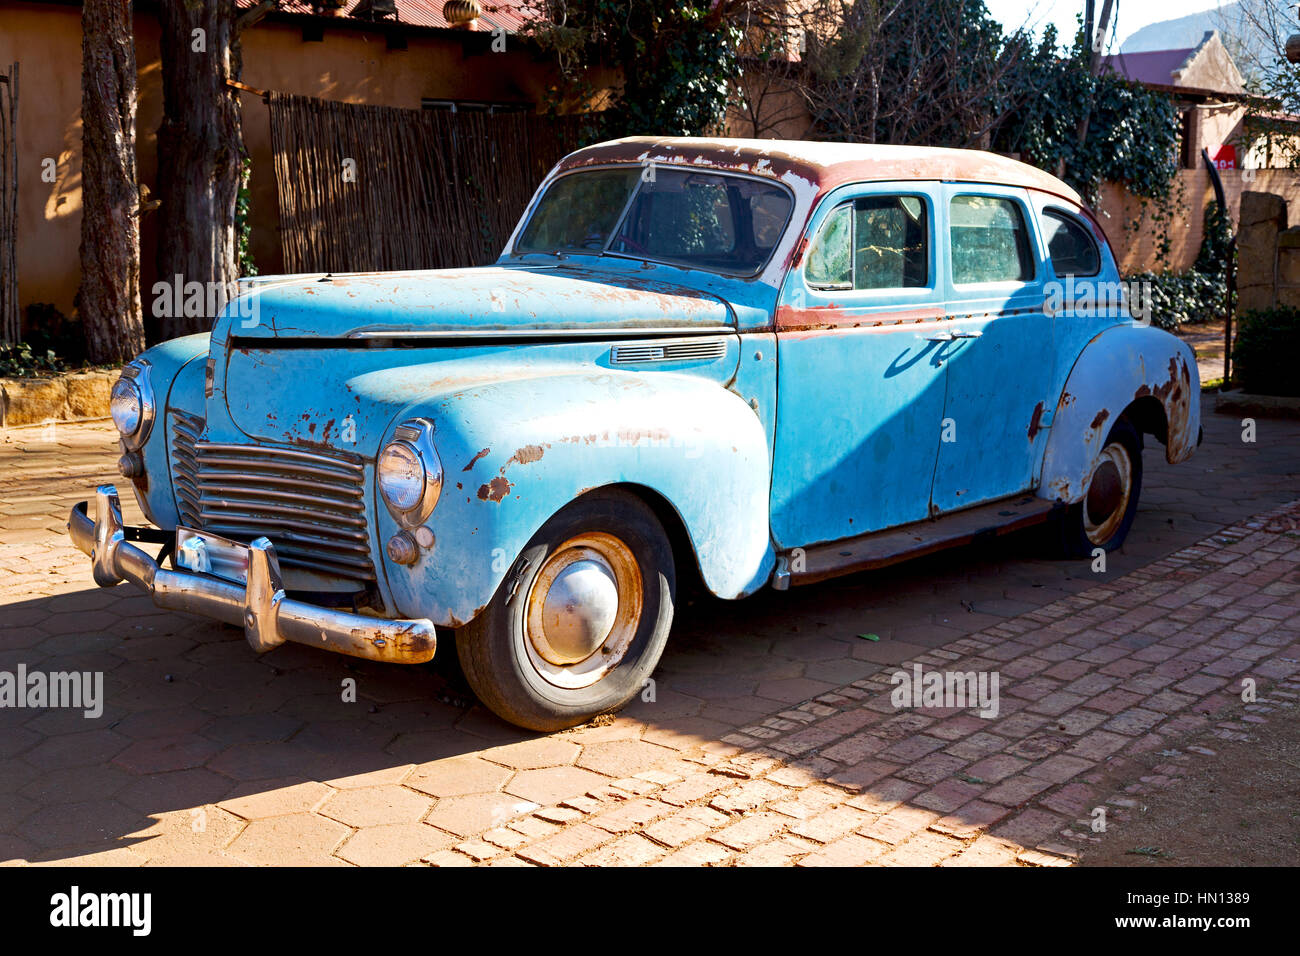 in south africa old abandoned american vintage car and  the house courtyard Stock Photo